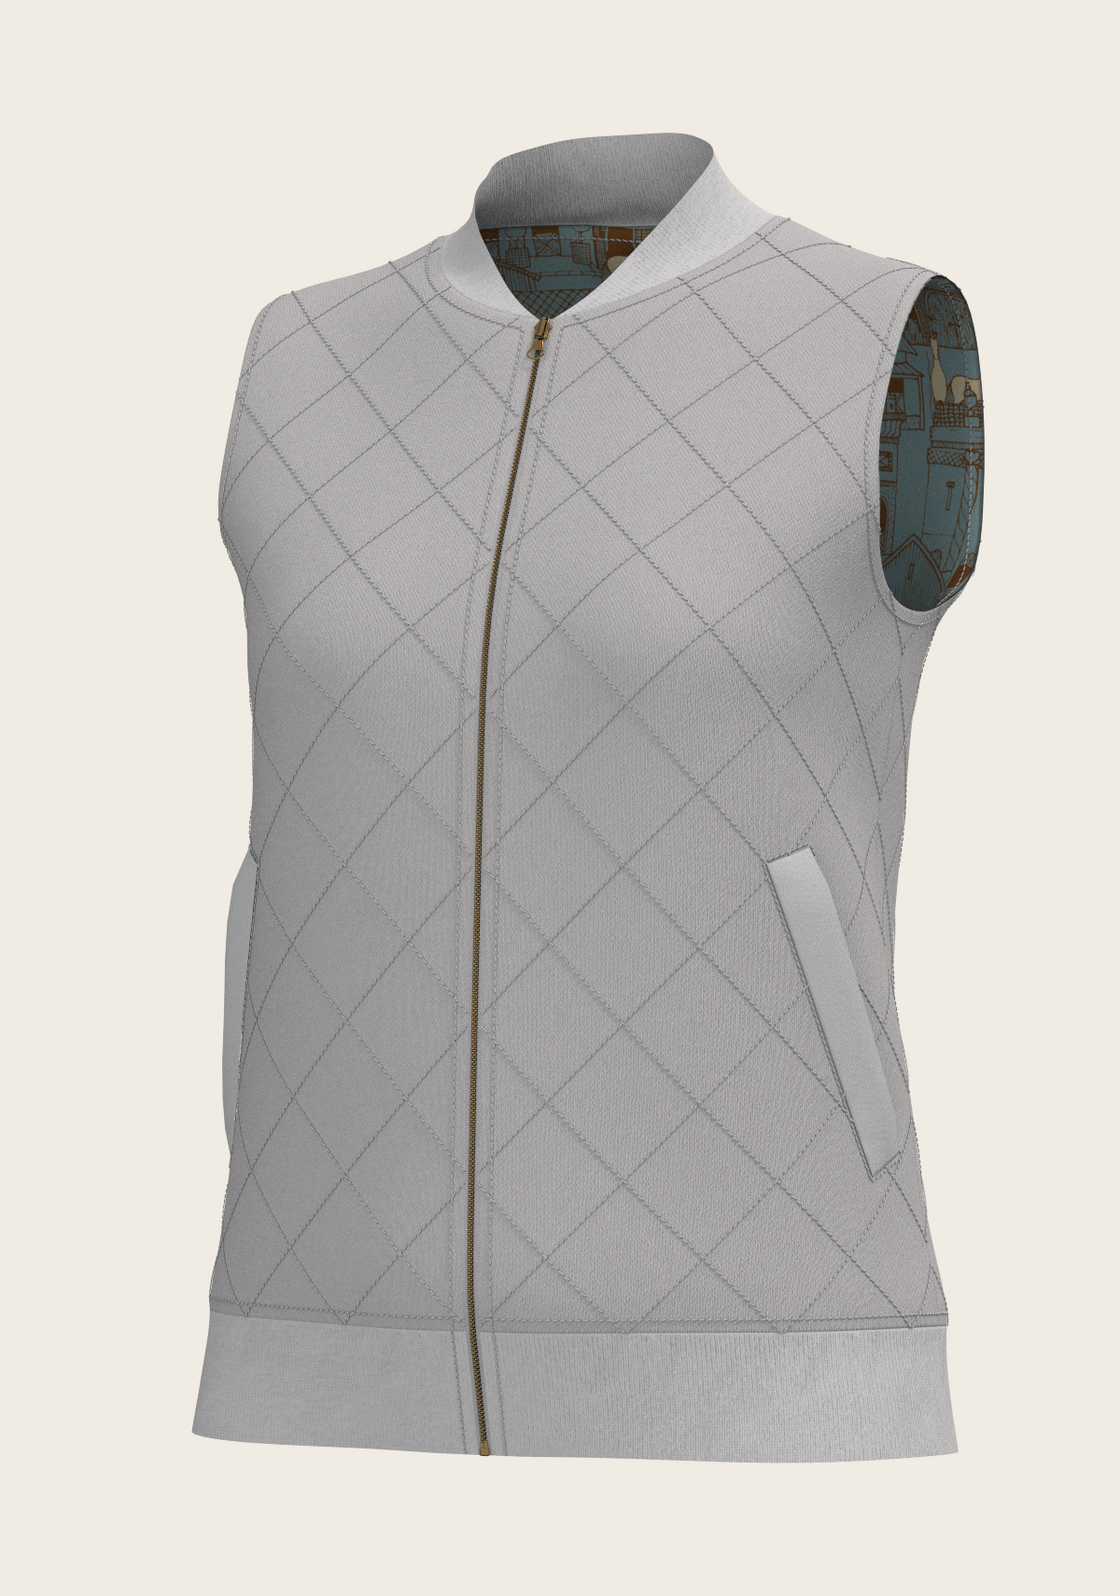 Tribe Sports Womens Layered Racer Vest (Pewter Grey)